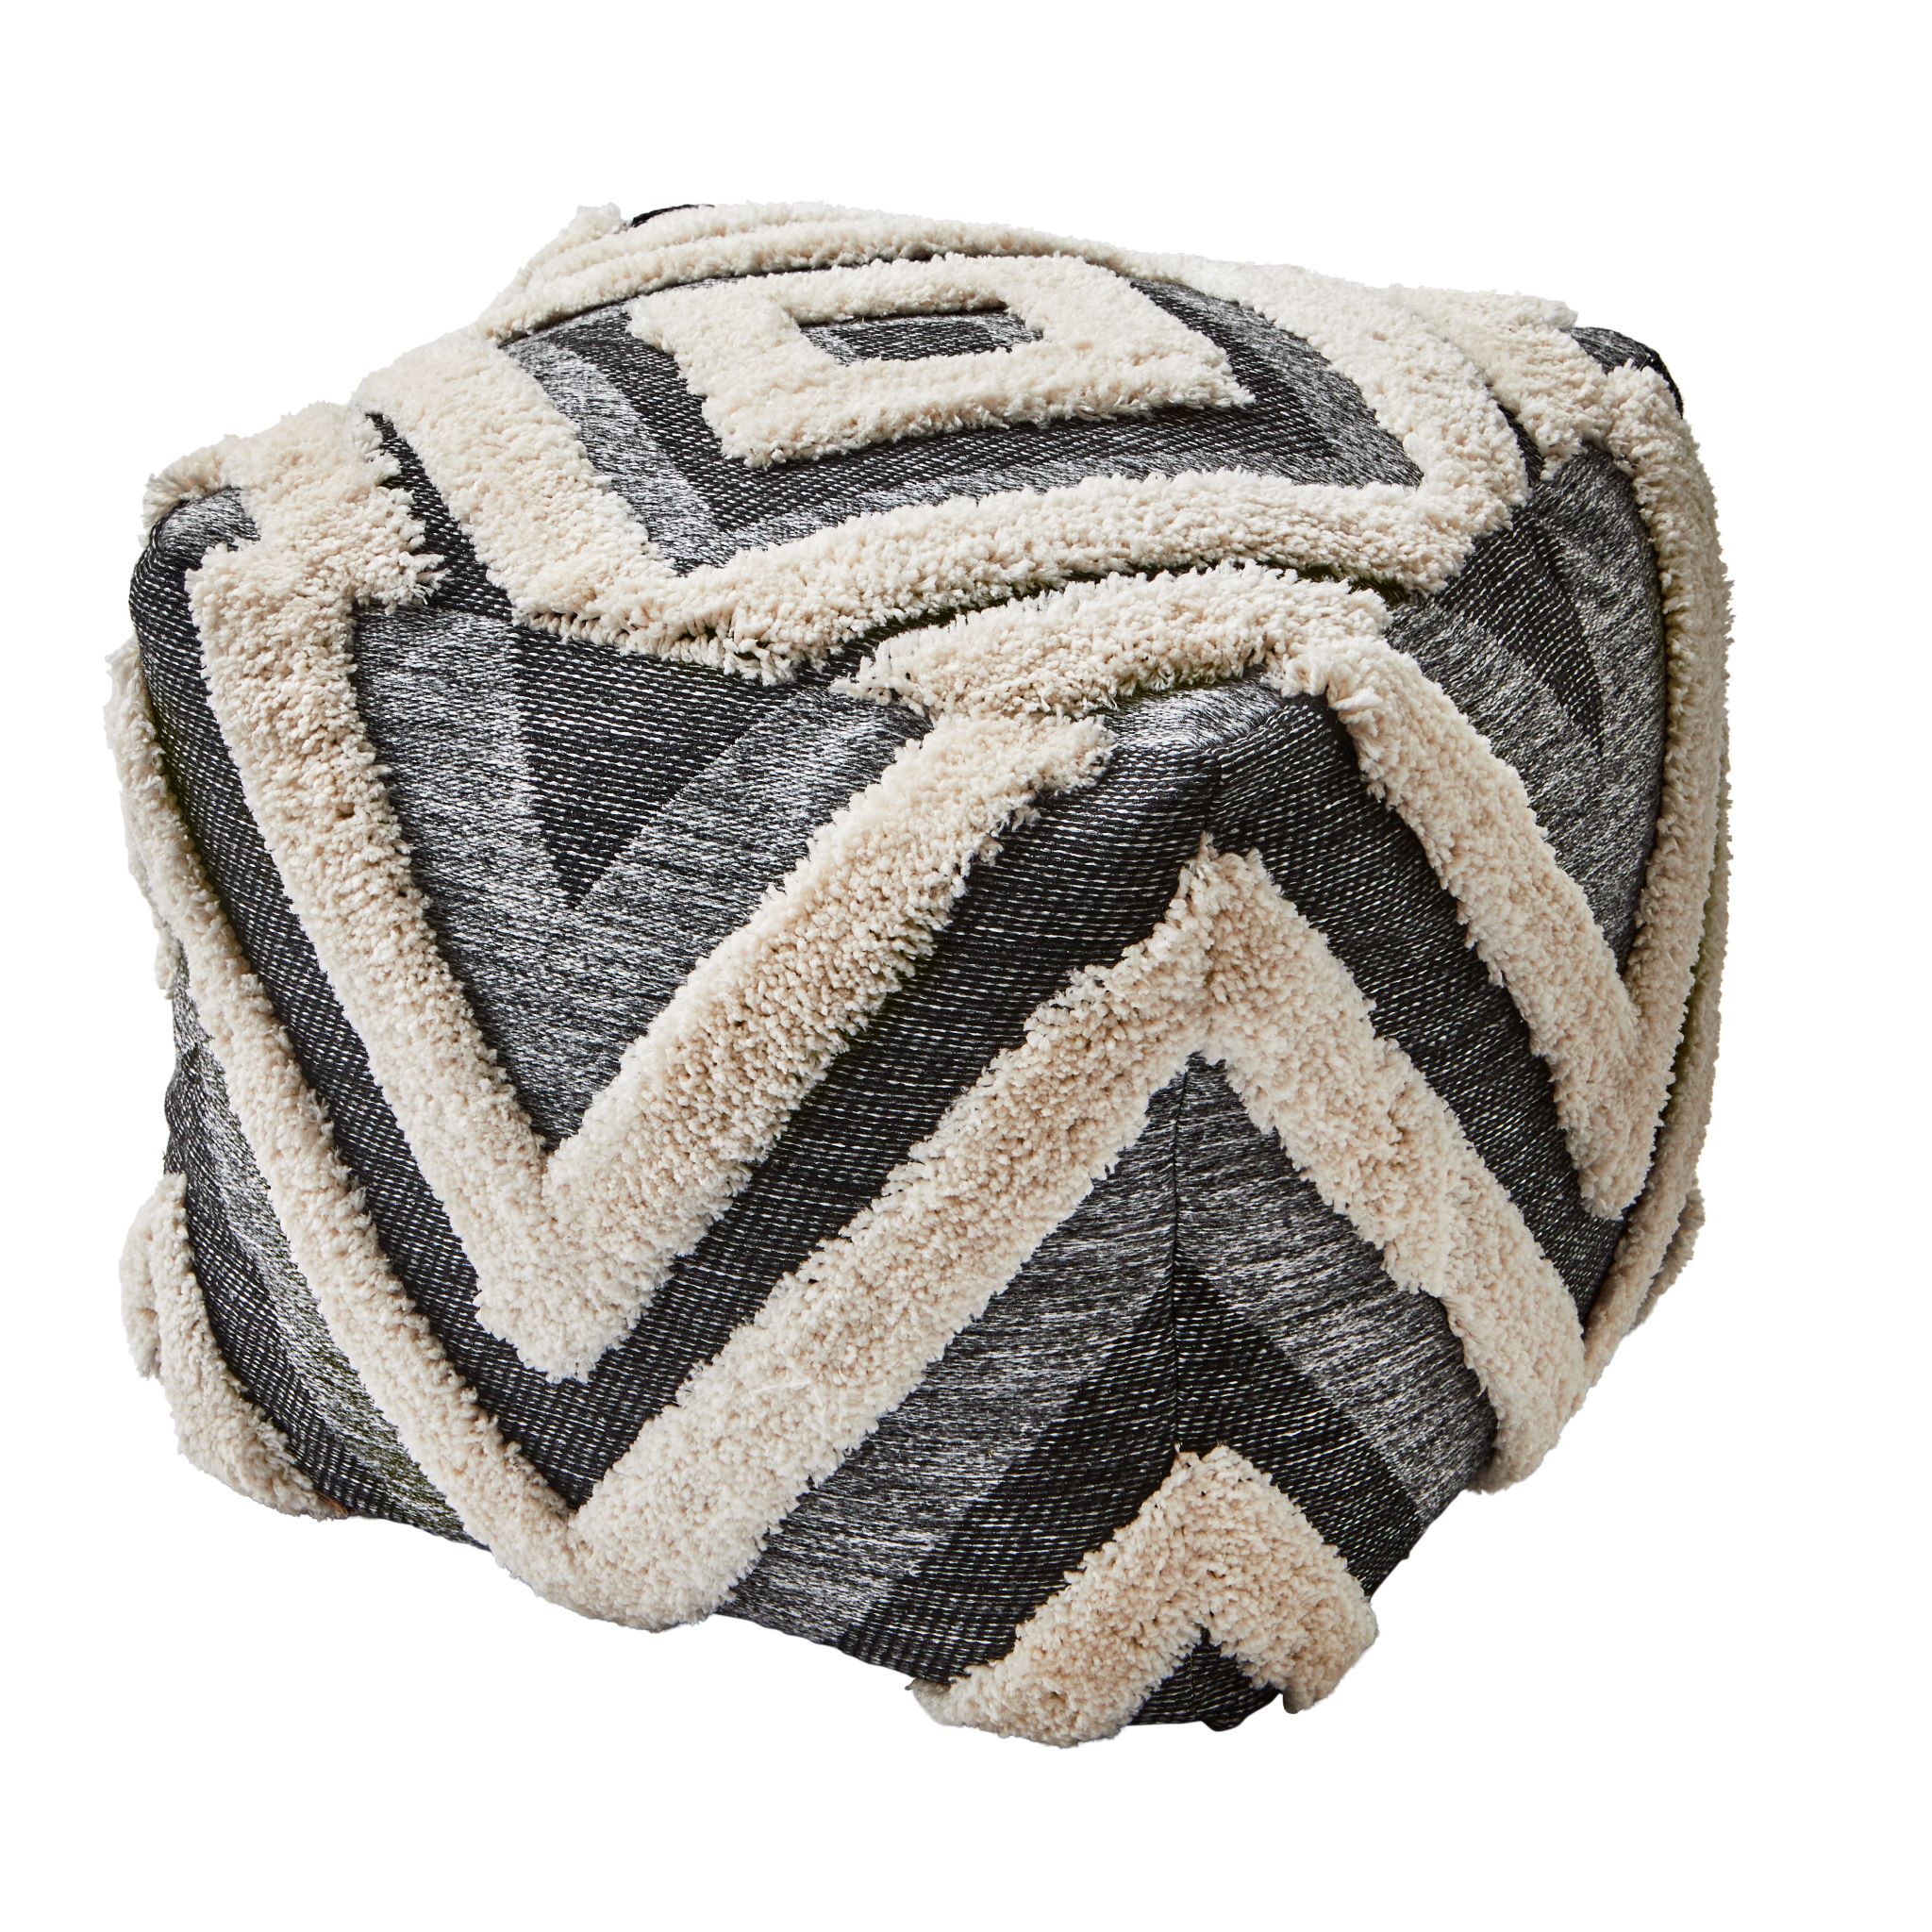 BH&G Tonal Tufted Outdoor Pouf, 16"x16"x16", Gray - image 1 of 5